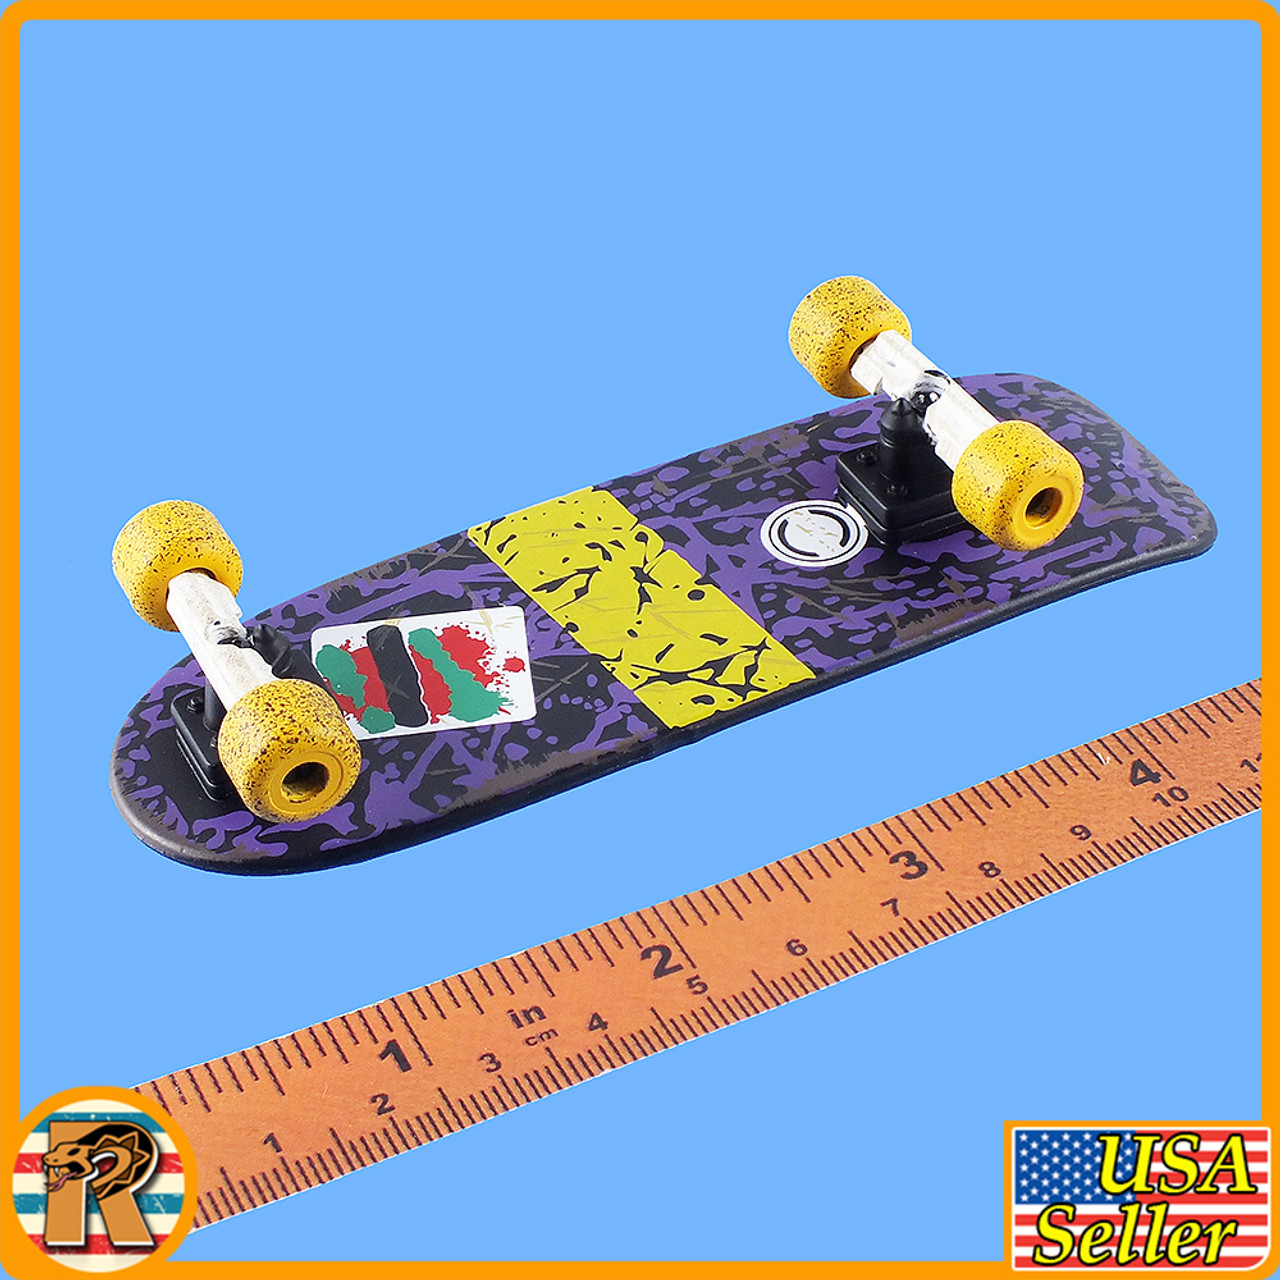 Time Travel Marty - Skateboard - 1/6 Scale -